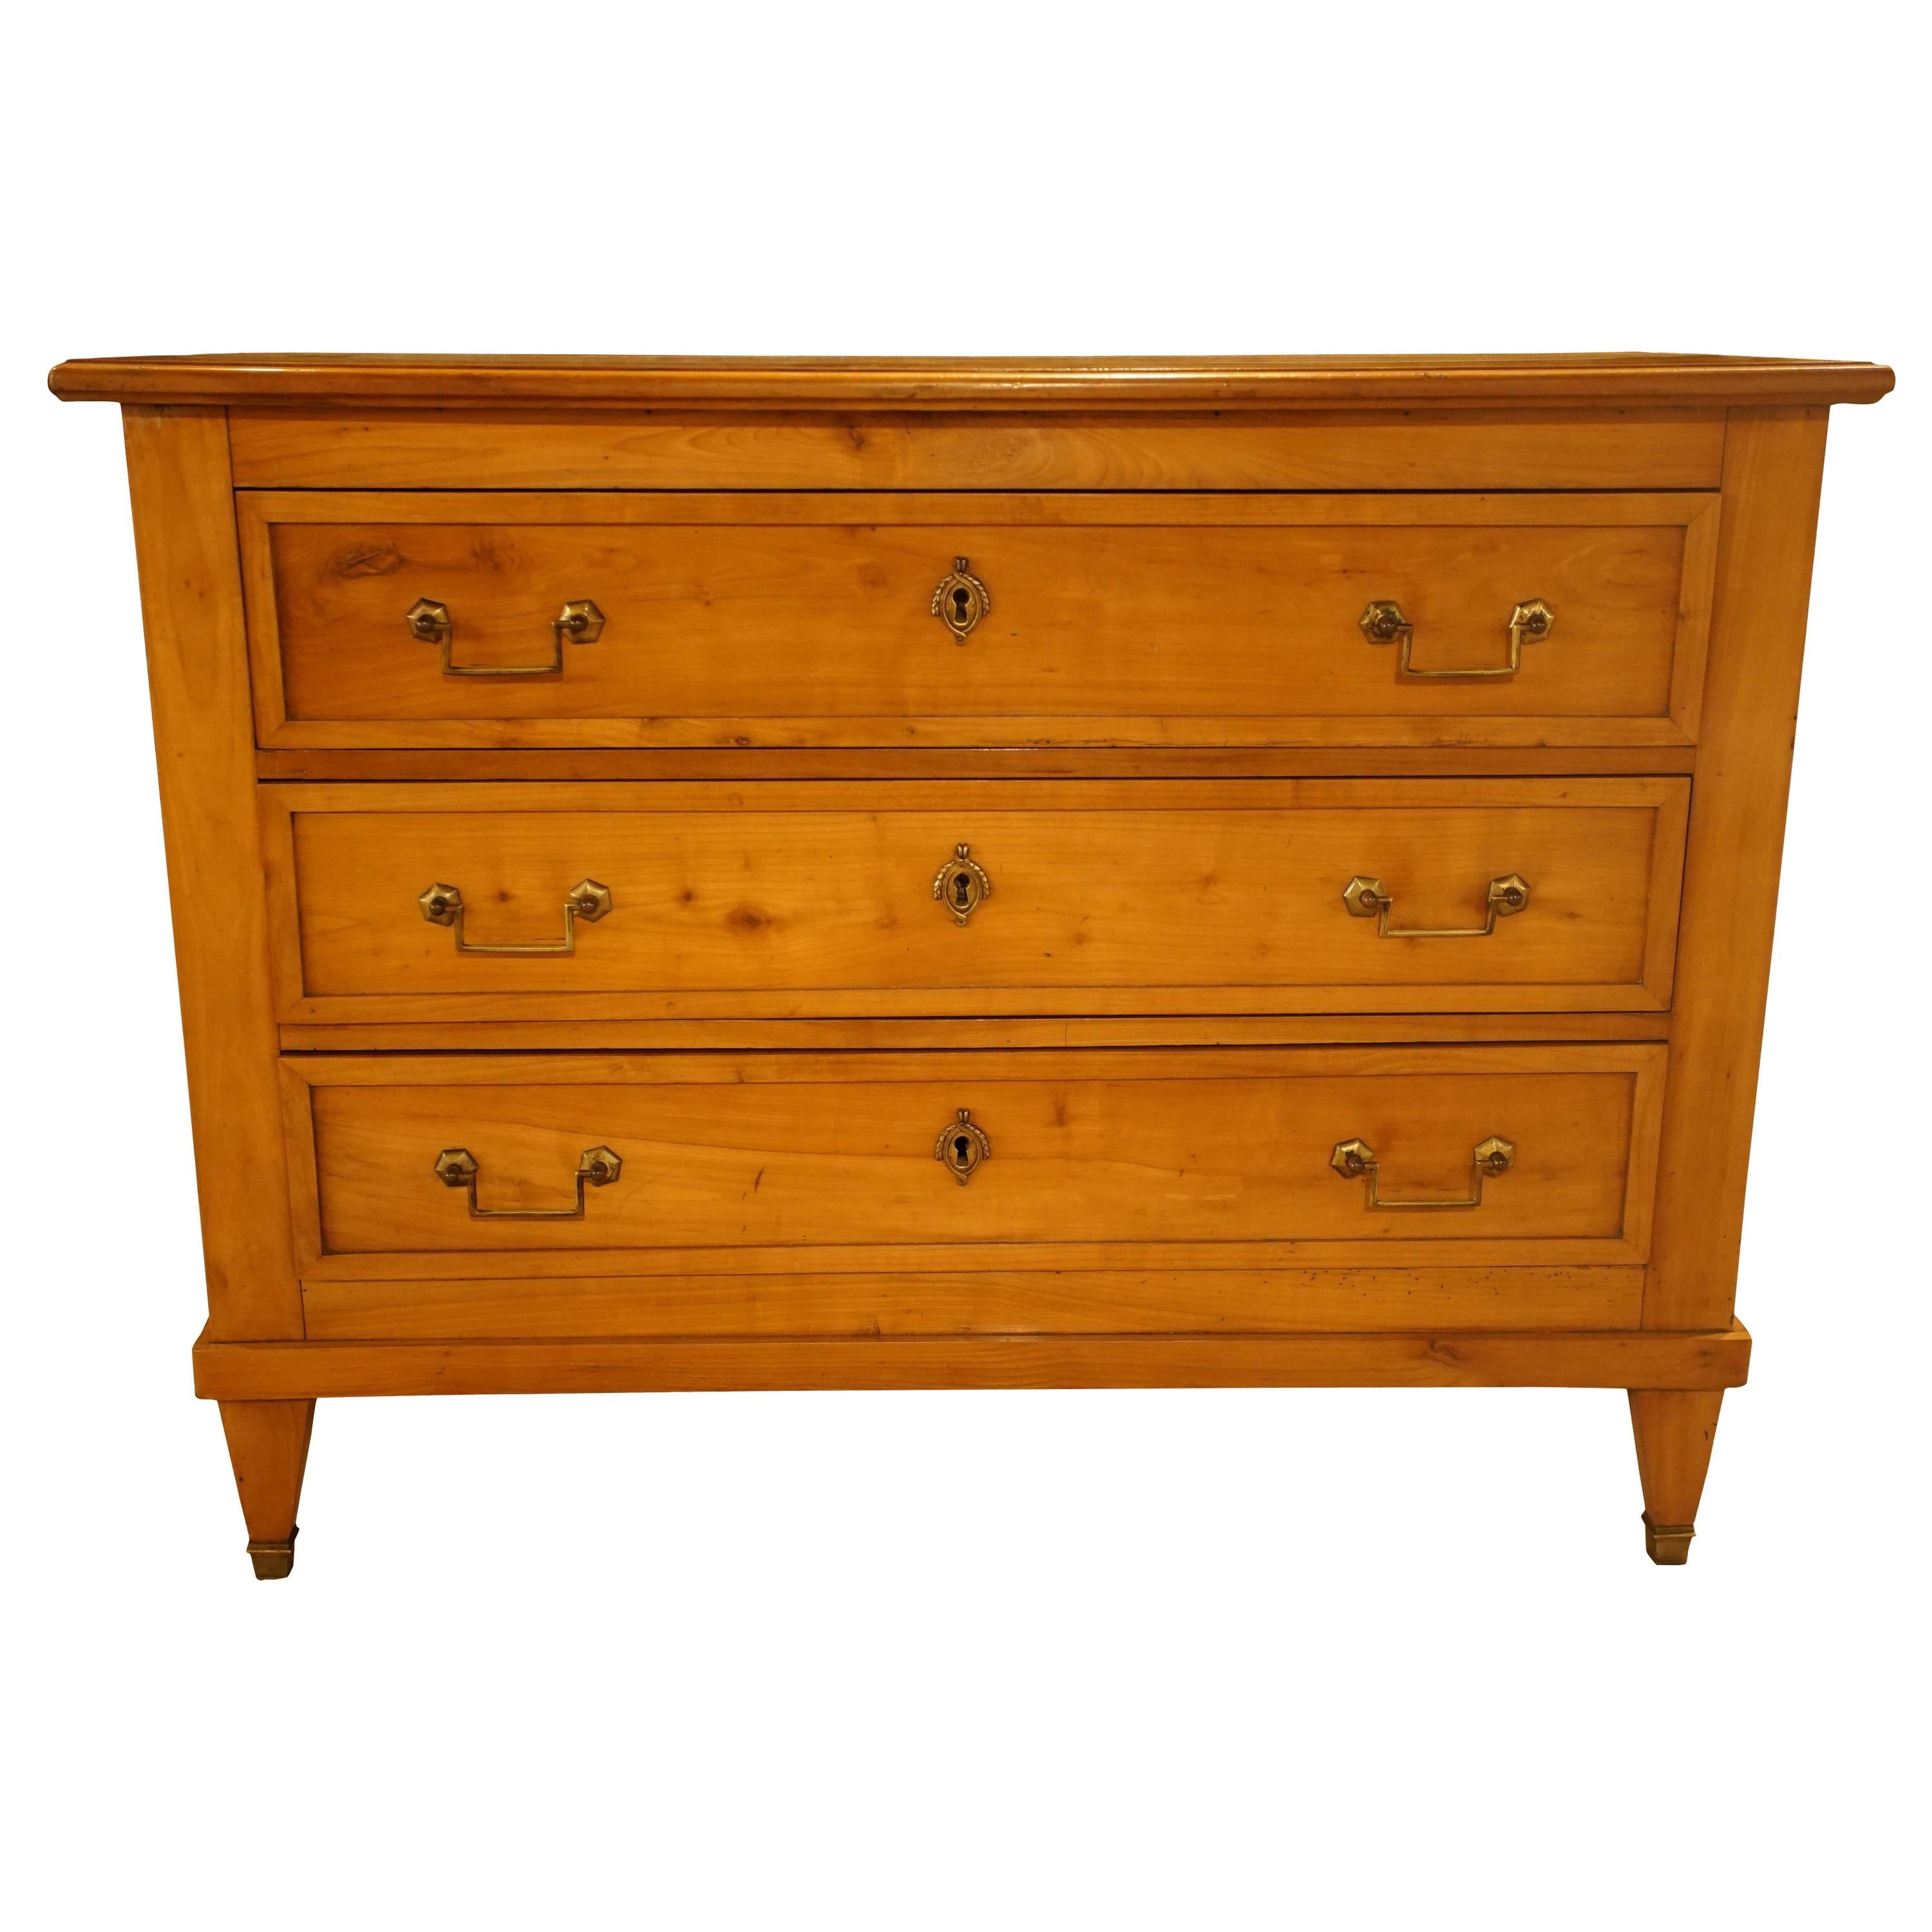 19th Century French Cherry Wood Chest of Drawers For Sale